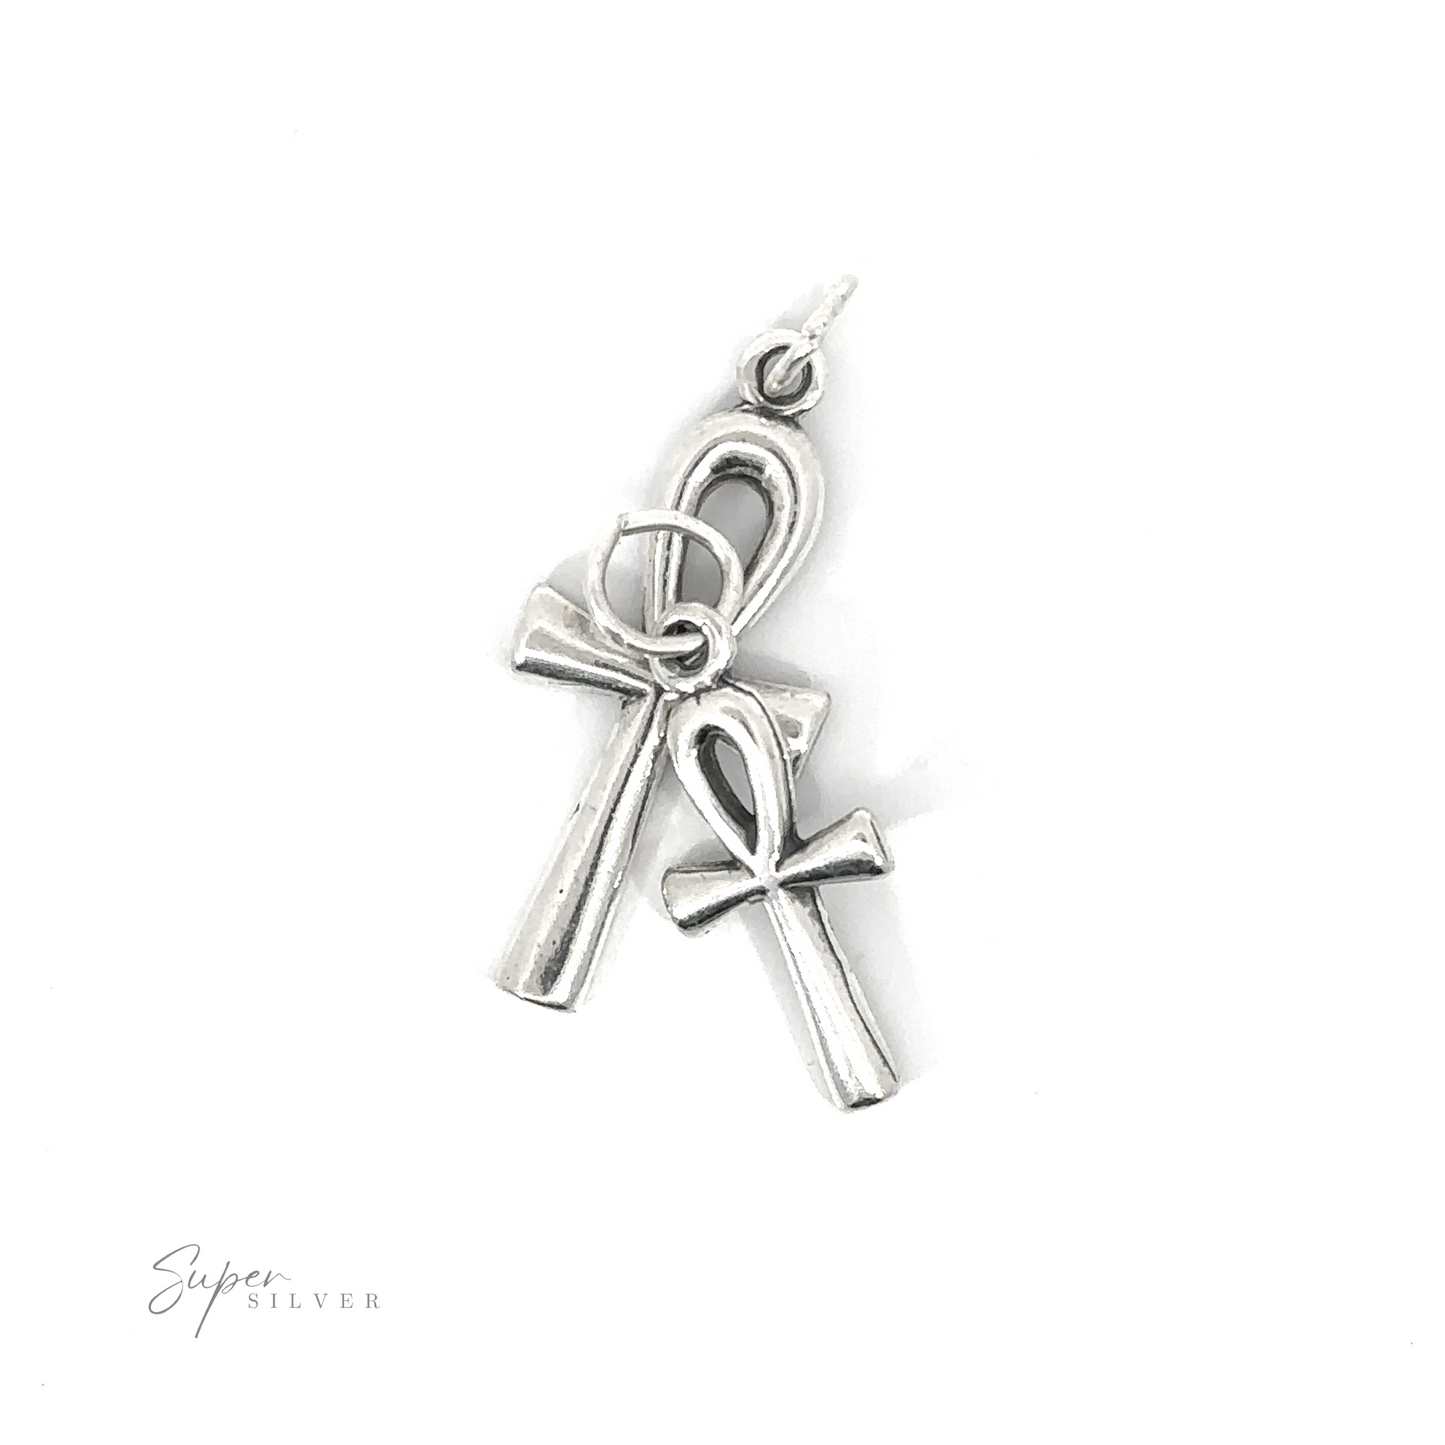 Two Ankh Charms, symbolizing eternal life, on a white background.